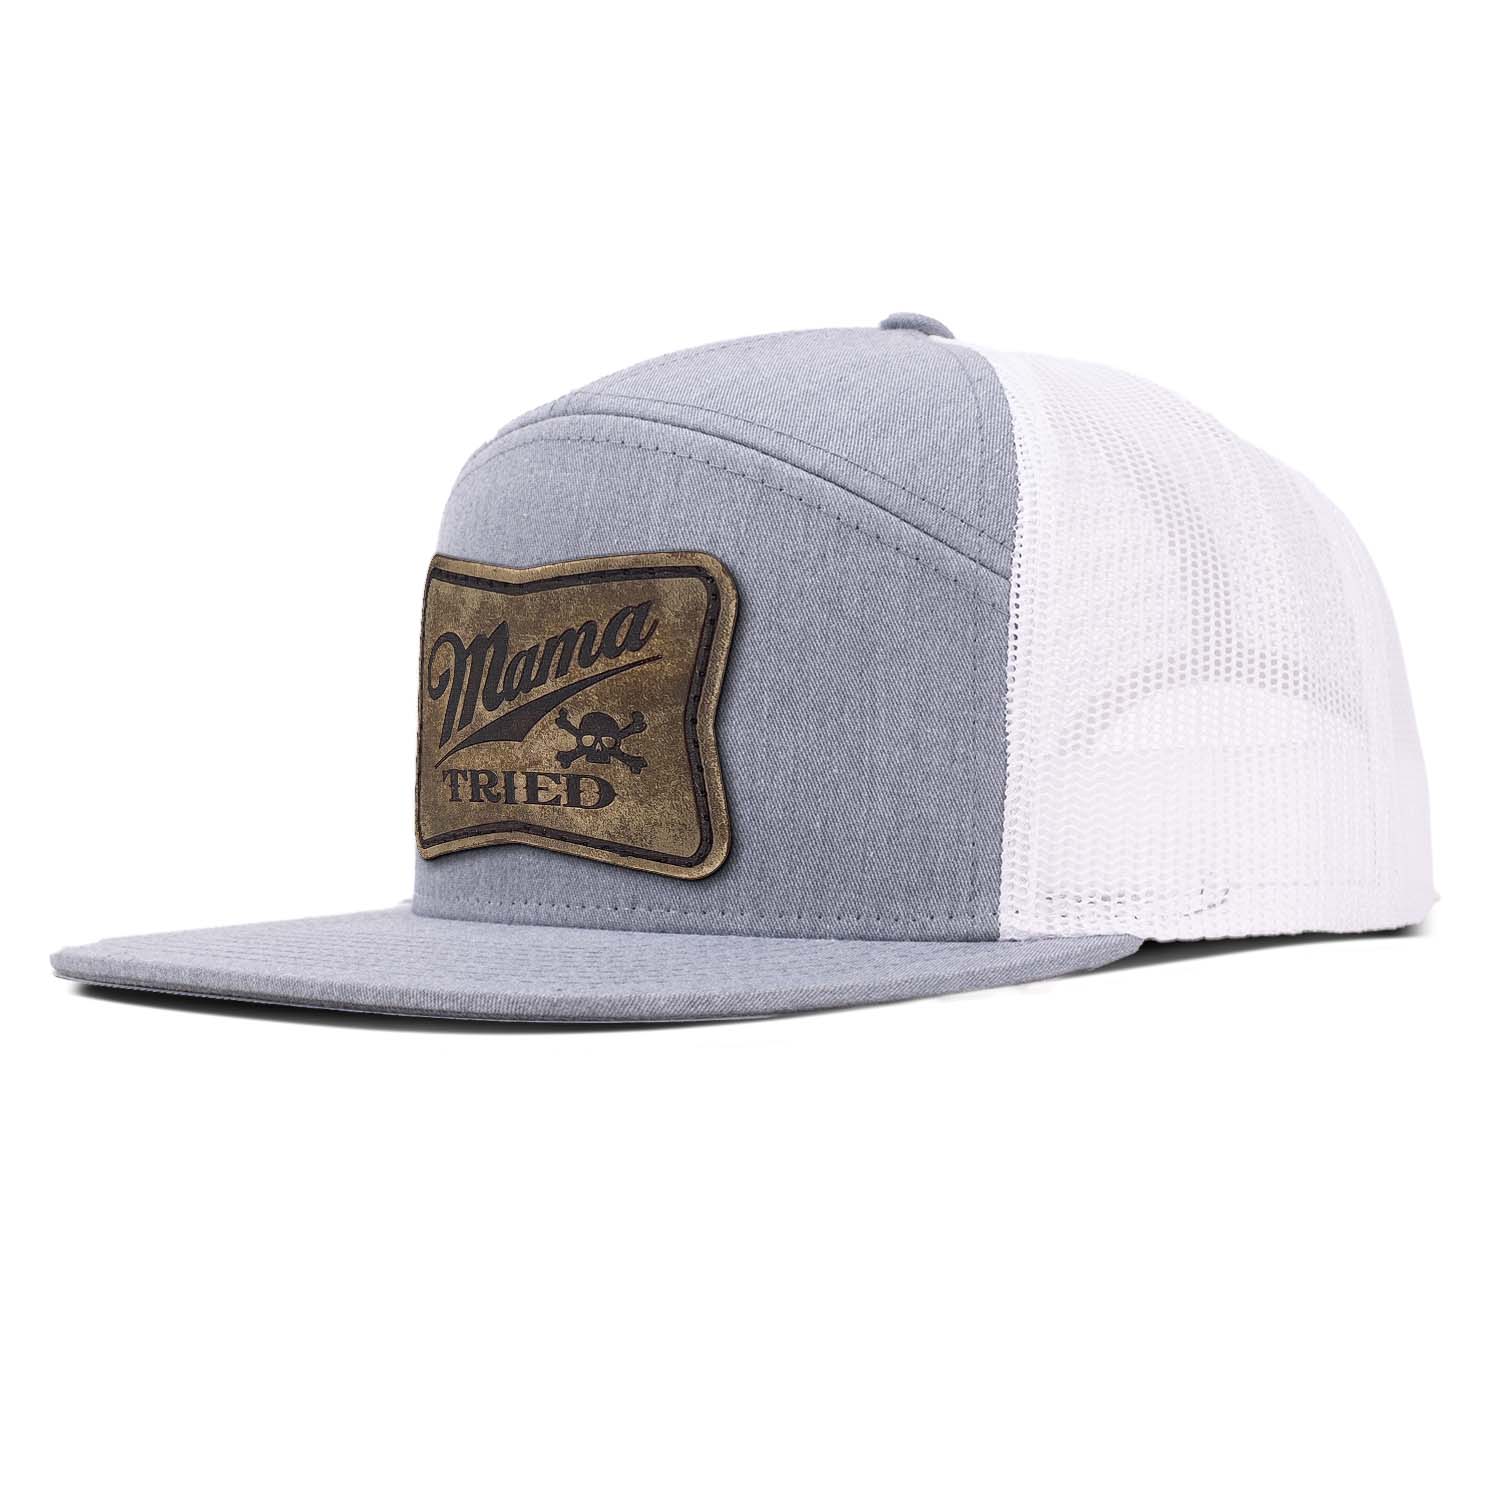 A heather gray 7 panel trucker hat with white mesh featuring our full grain leather vintage finish Mama Tried patch stitched on the seamless front panel